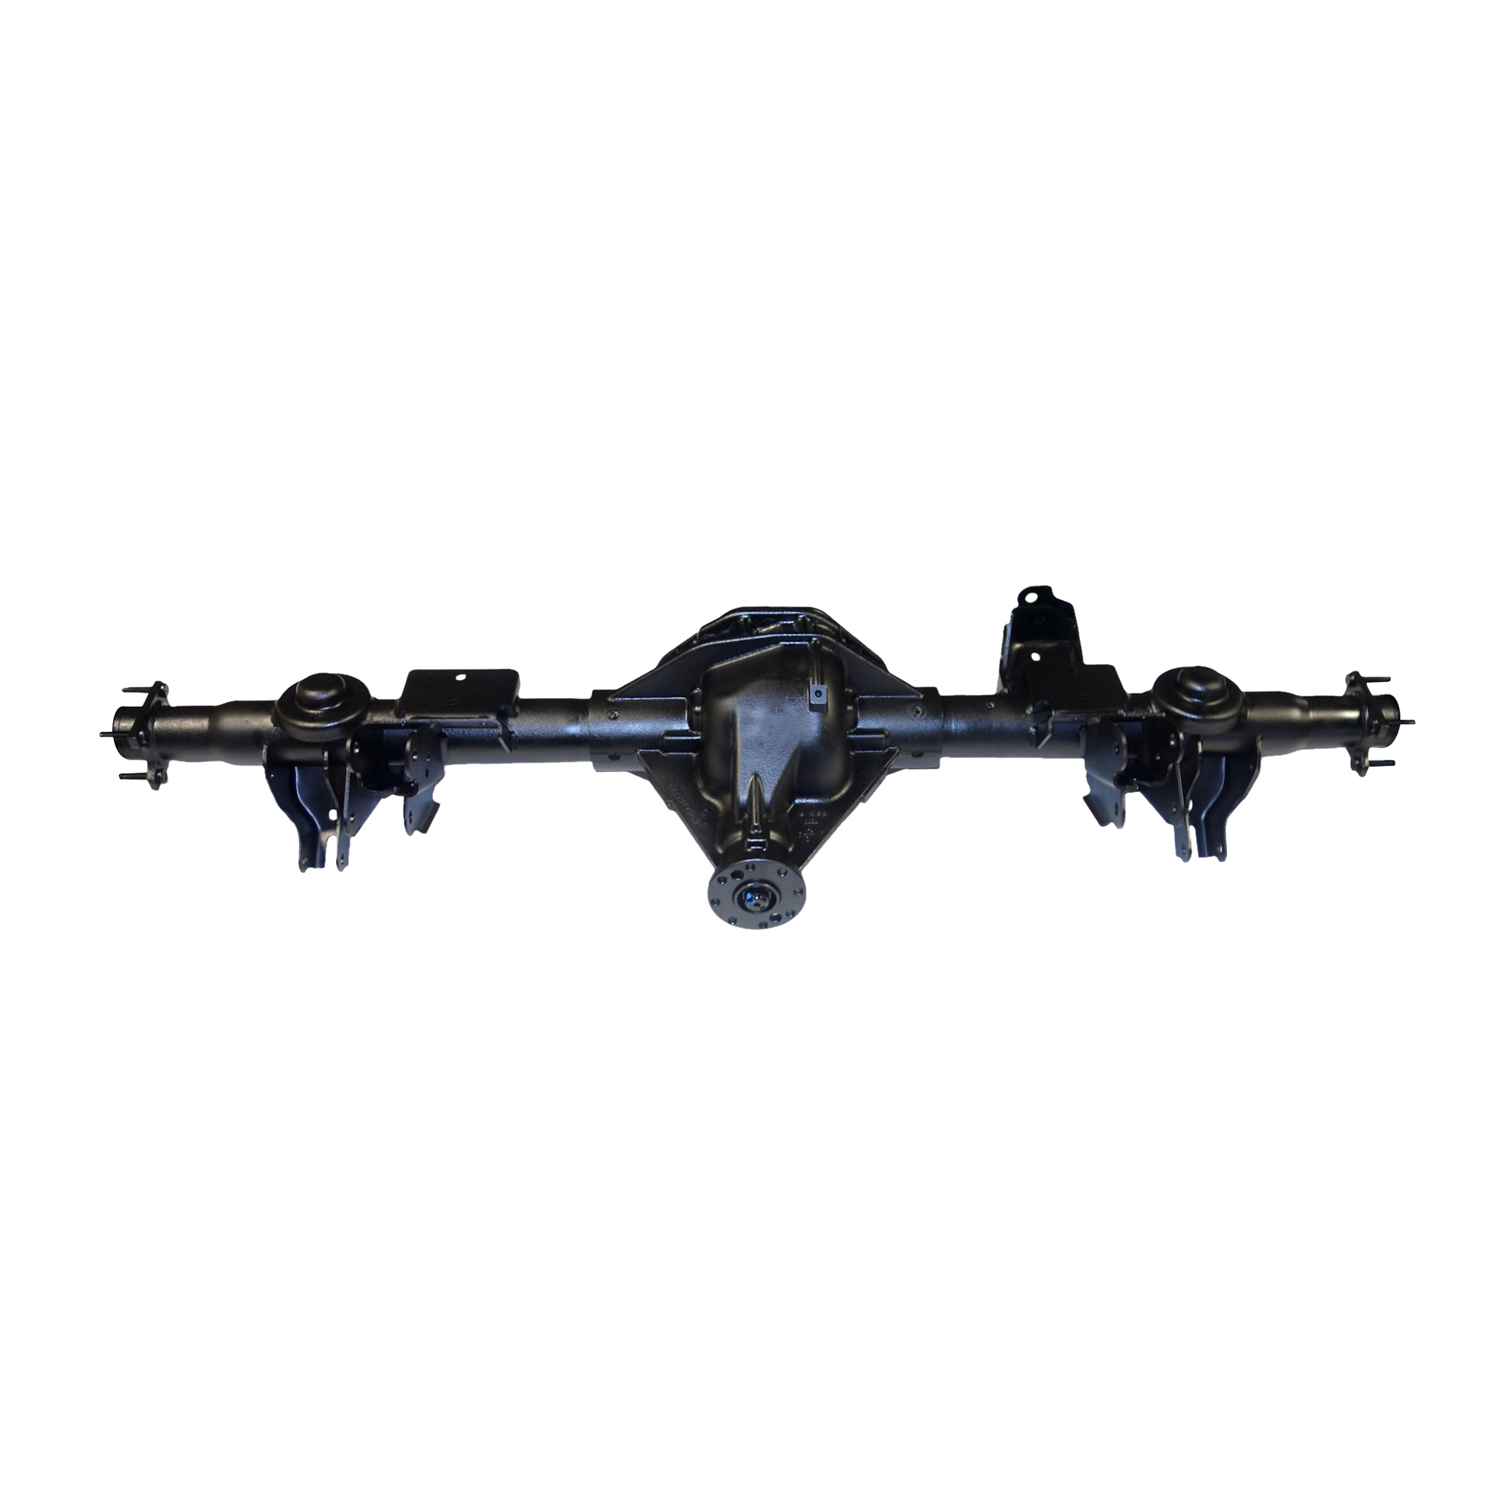 Reman Axle Assembly for Chrysler 9.25ZF 13-14 Dodge Ram 1500 3.92 Ratio